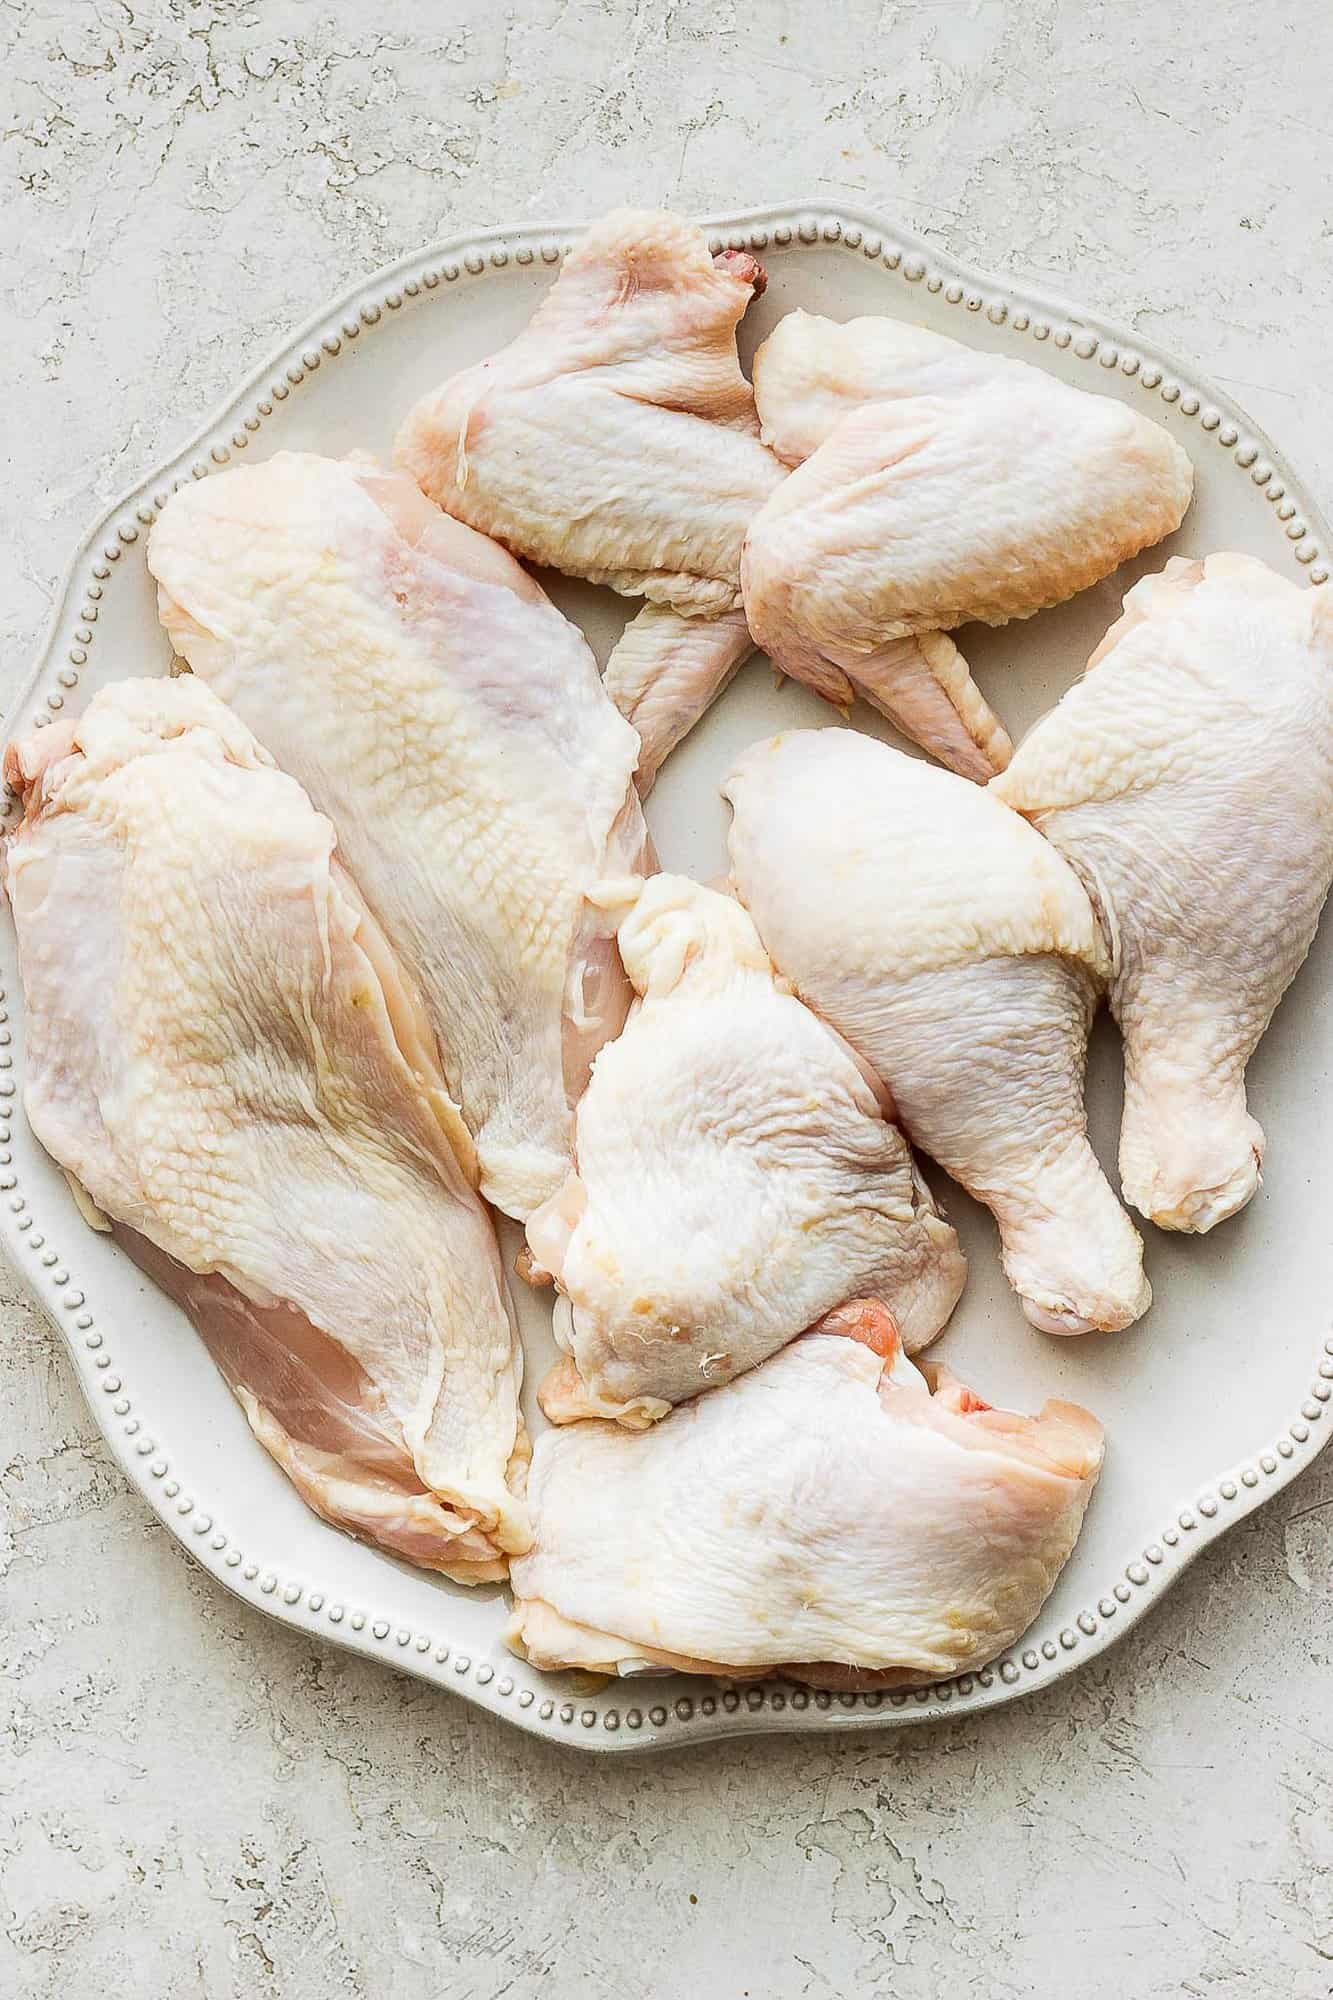 Here's Why You Should Have A Separate Cutting Board For Raw Chicken